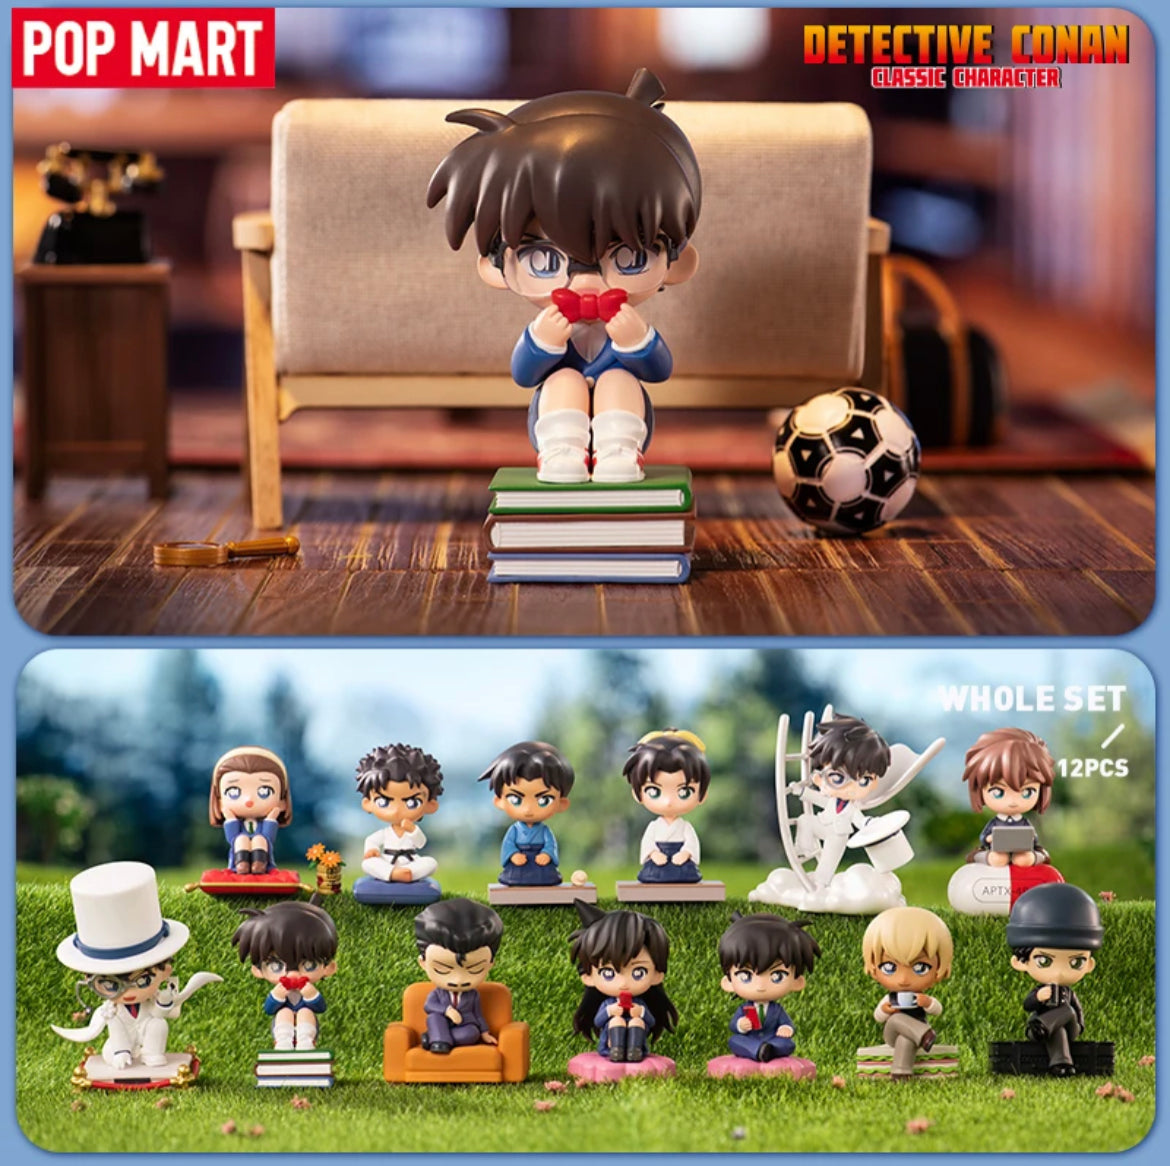 Detective Conan: Classic Characters Mystery boxes Pop Mart